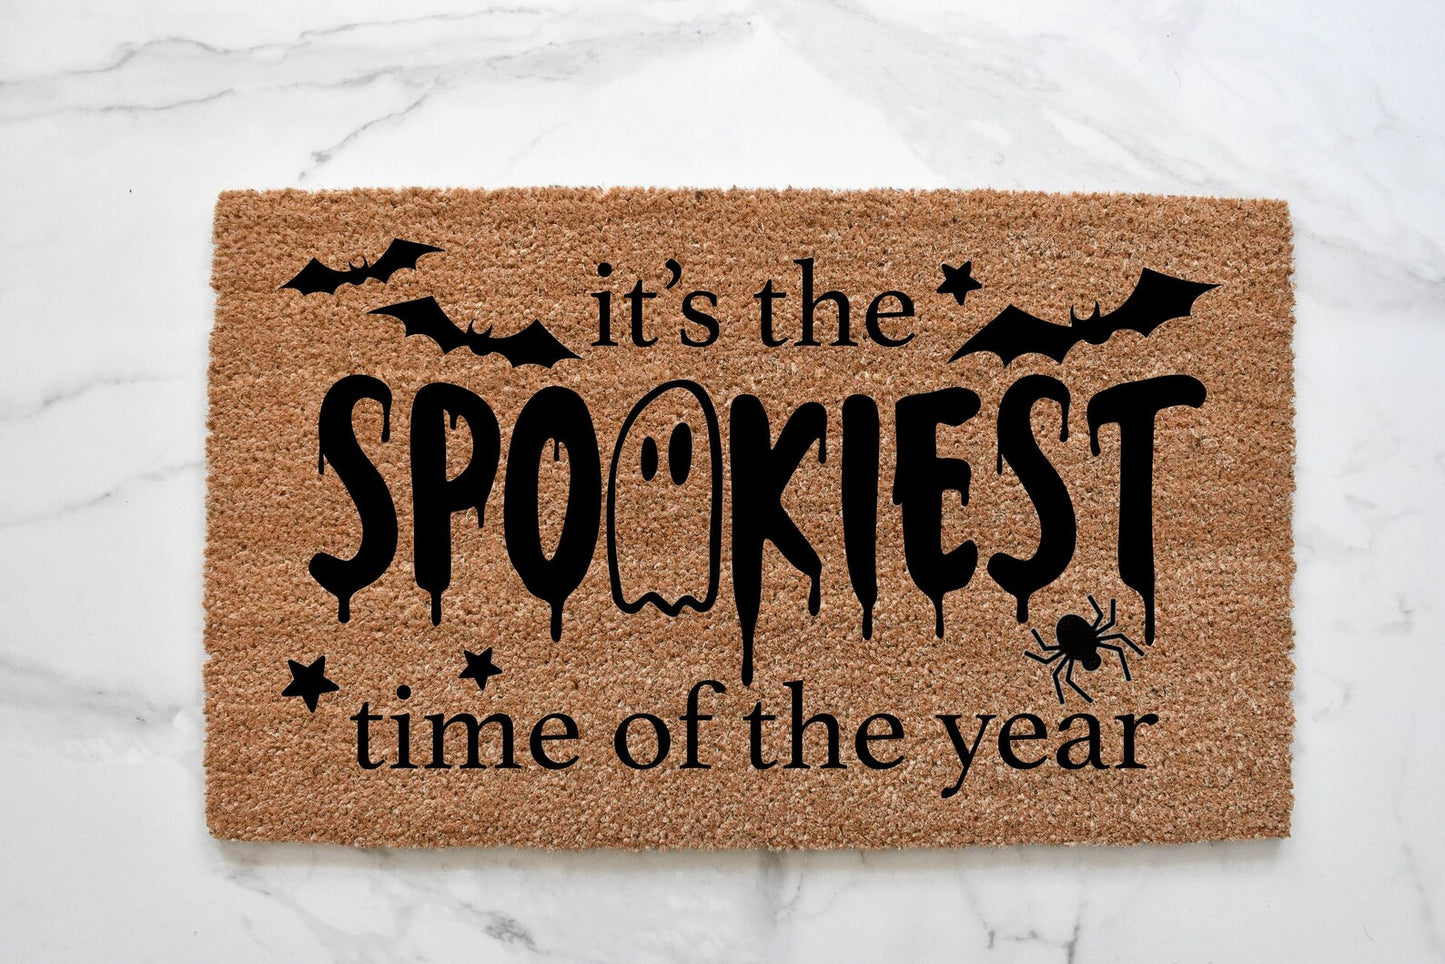 It's The Spookiest Time Of The Year Doormat